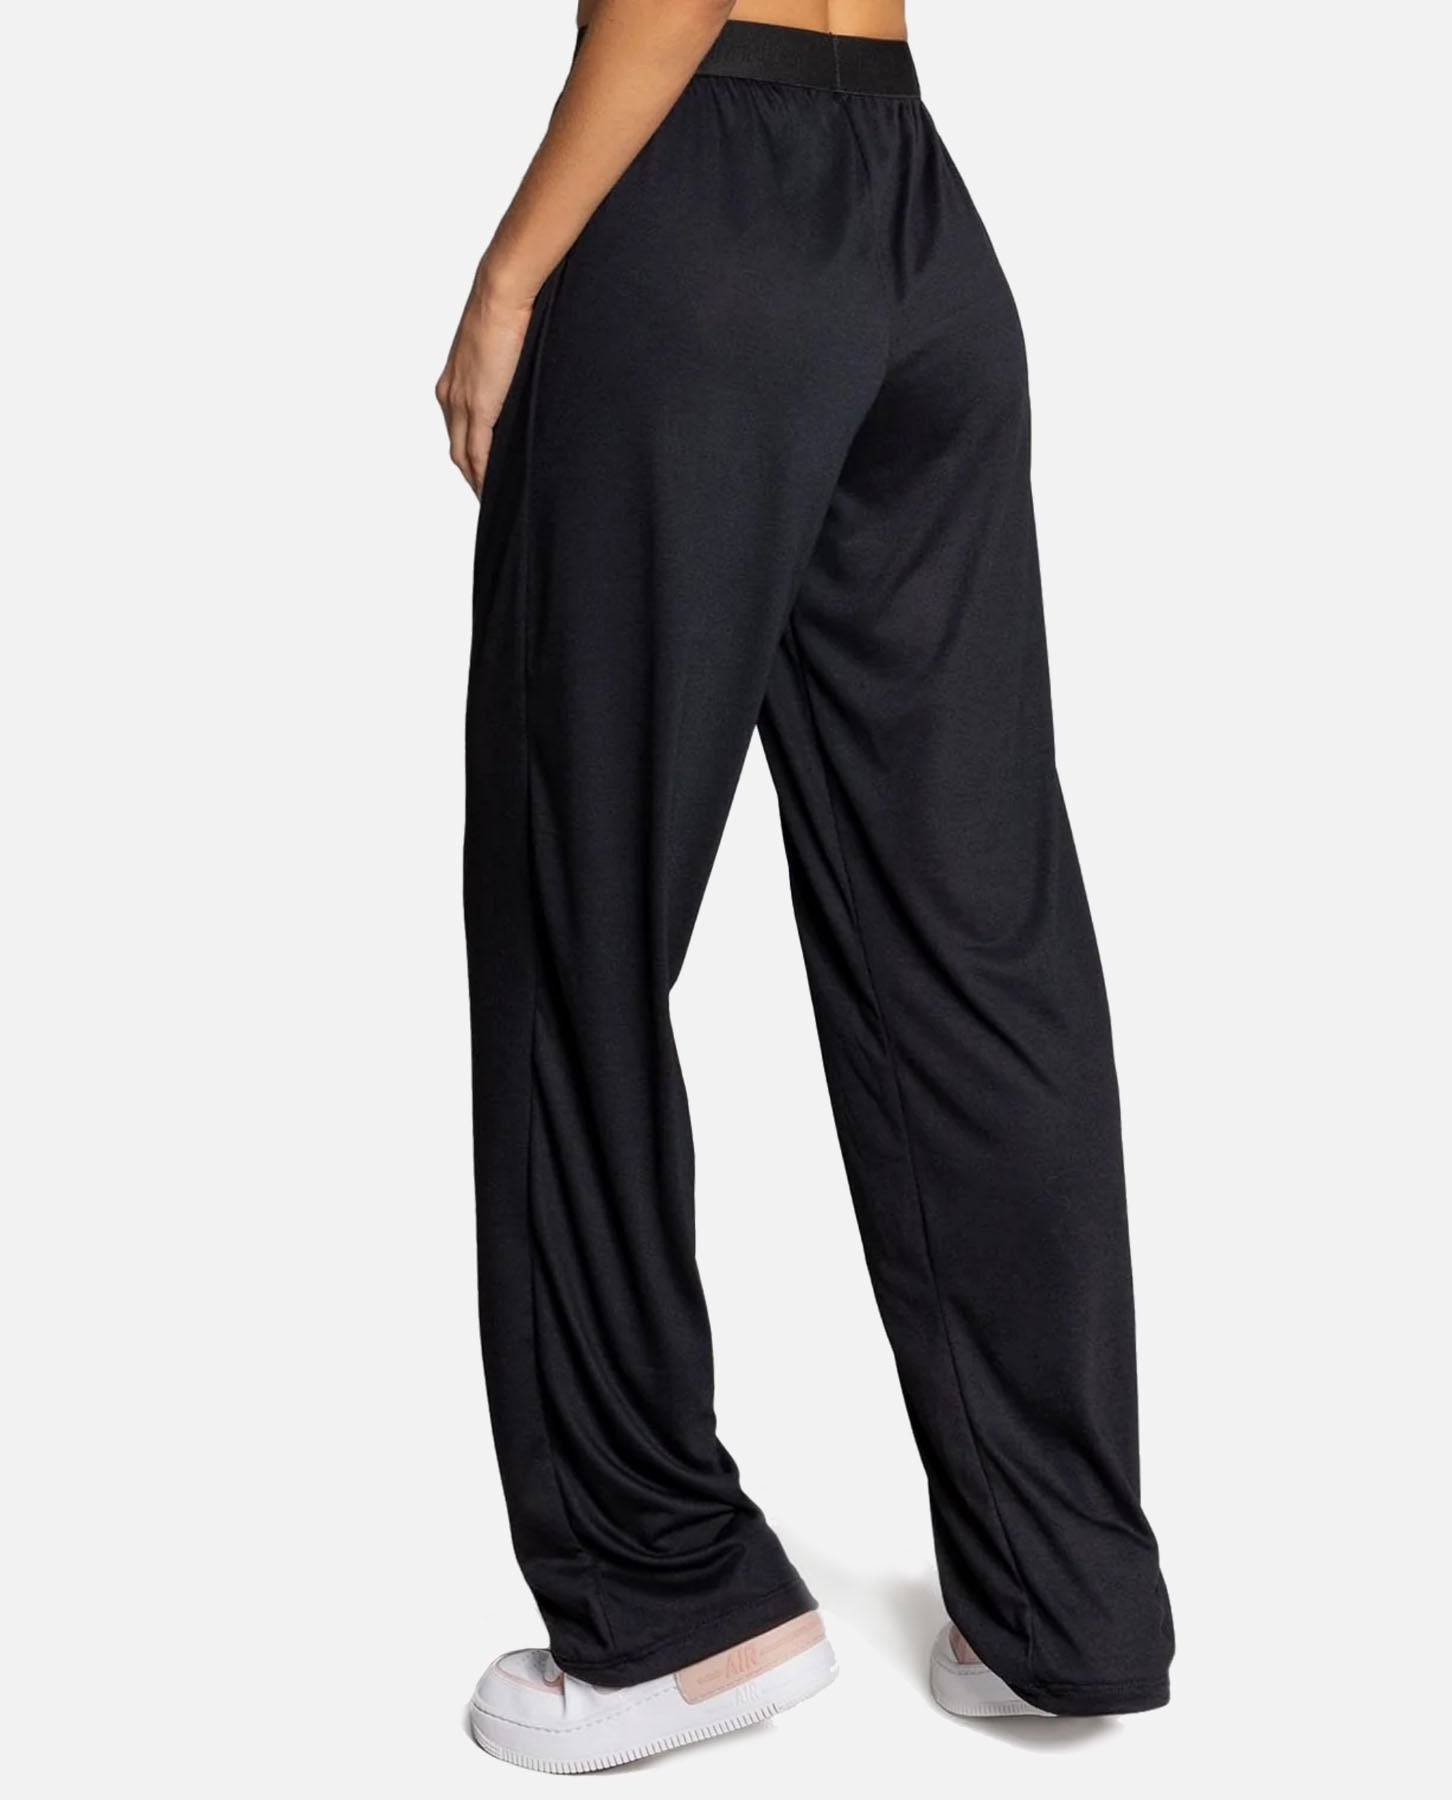 Relaxed Flow Pant - F 15194